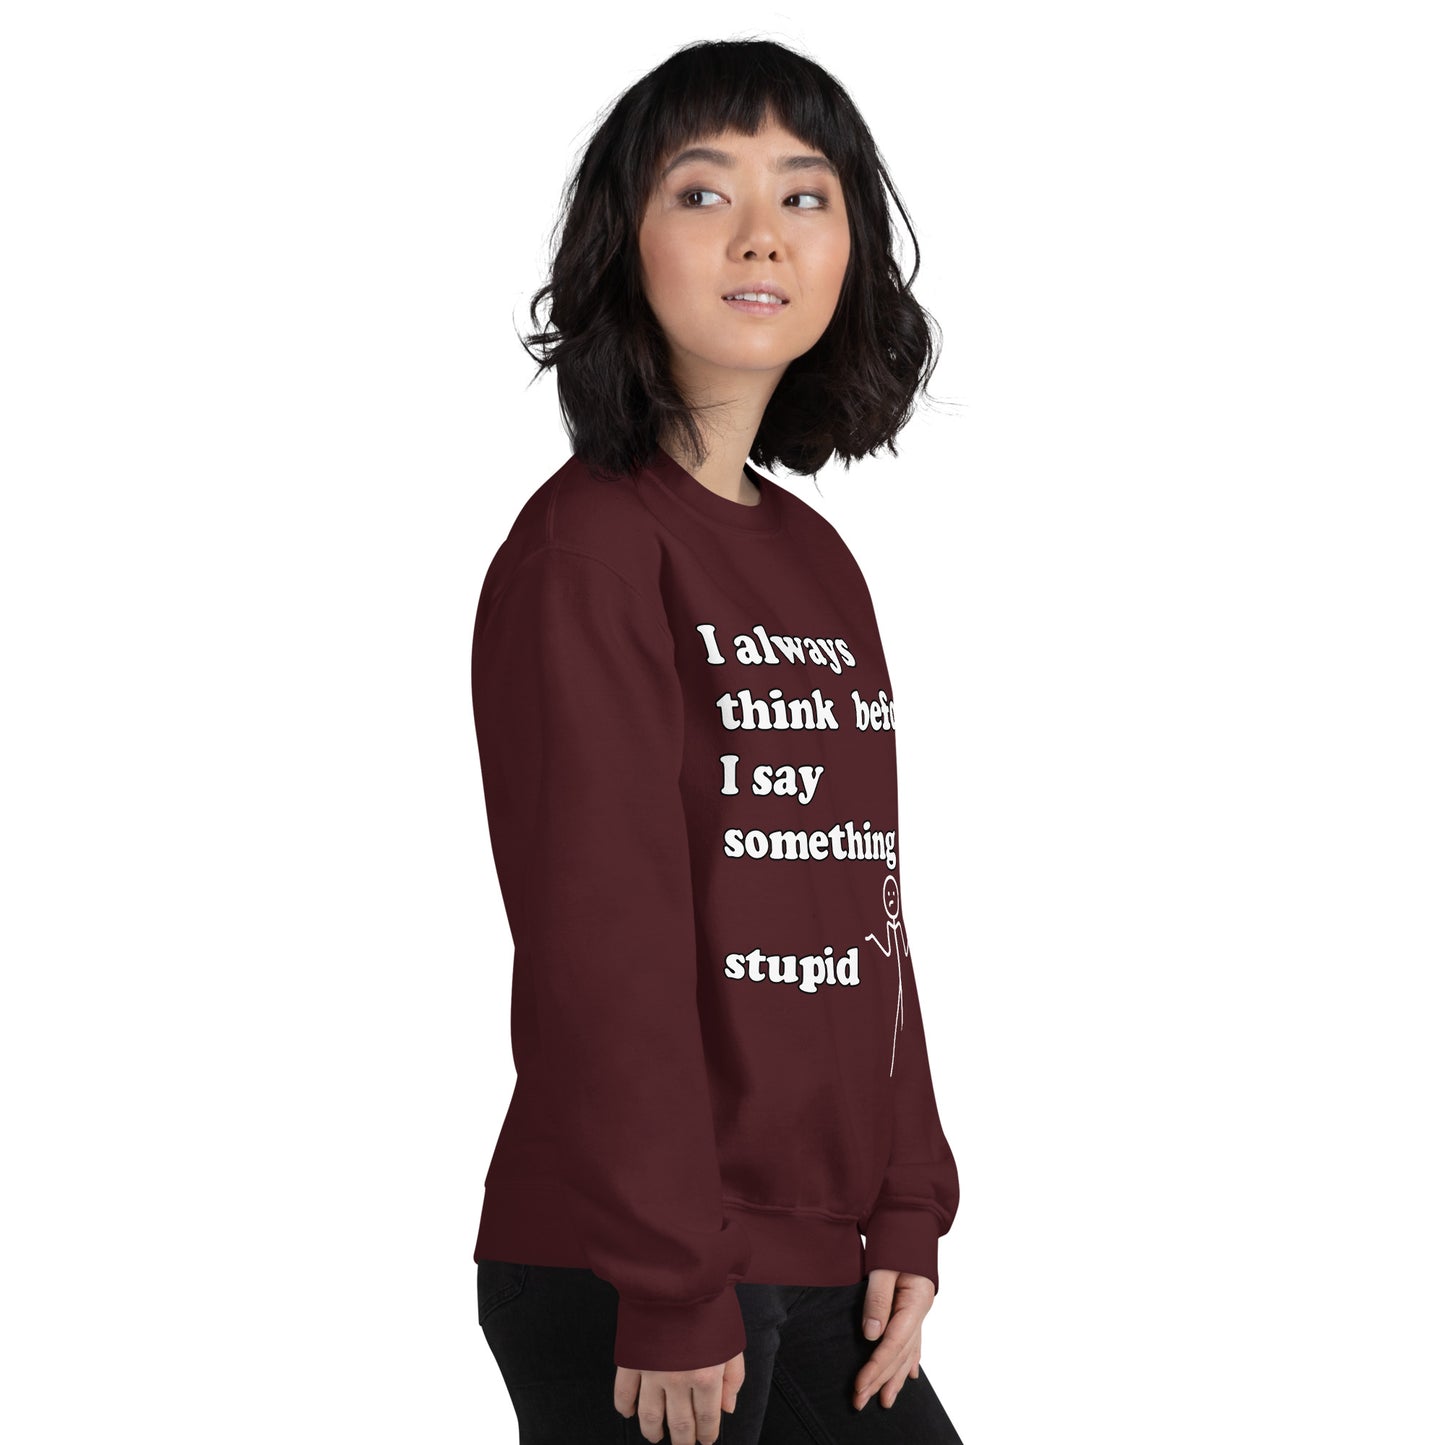 Woman with maroon sweatshirt with text "I always think before I say something stupid"